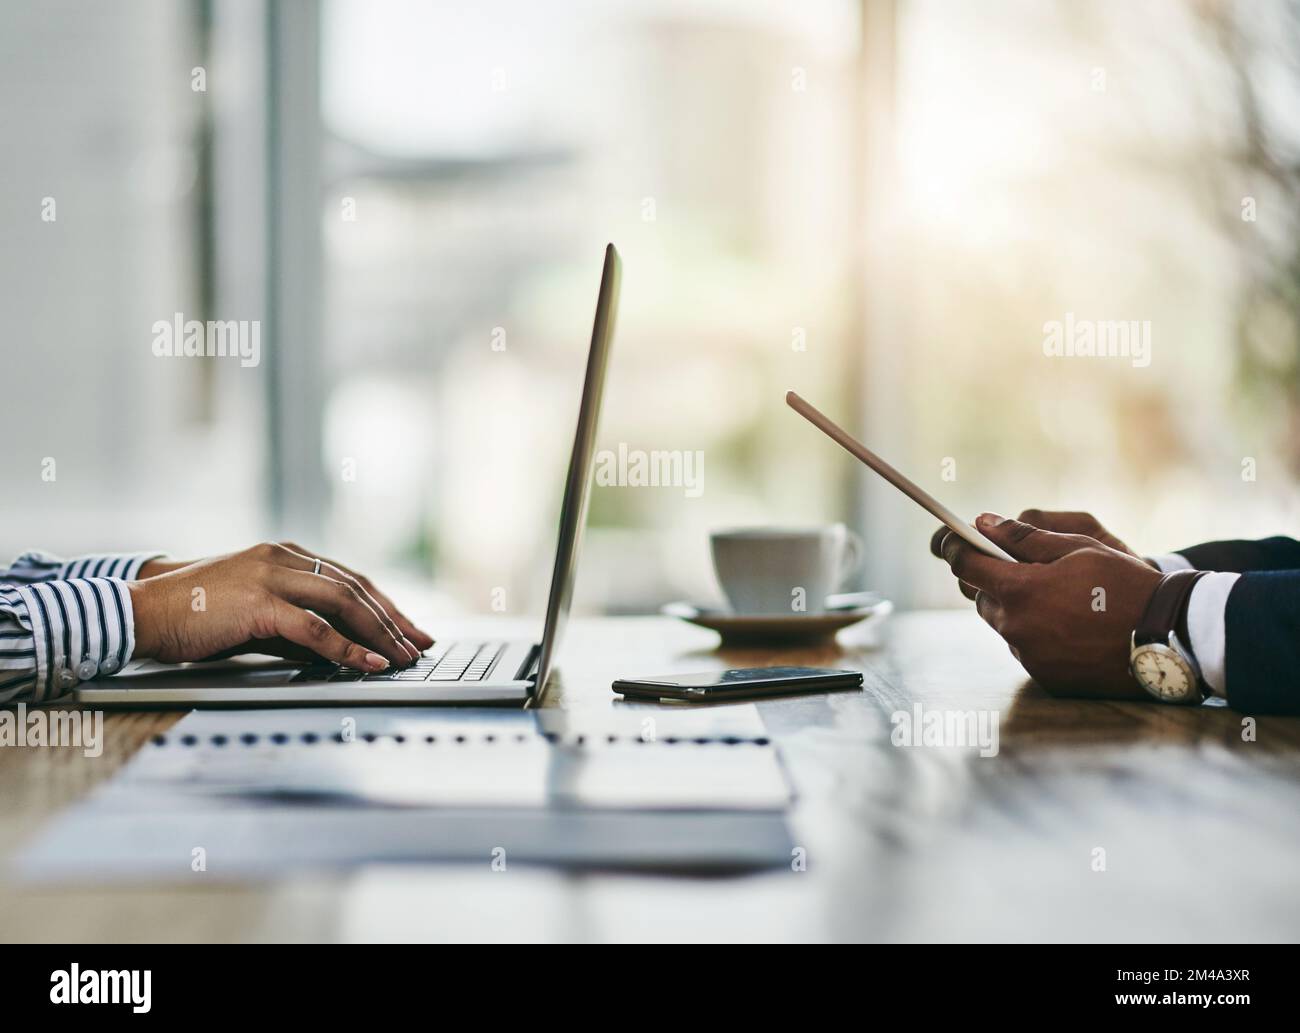 Business cant survive without modern technology. Closeup shot of two businesspeople using digital devices during a meeting in an office. Stock Photo